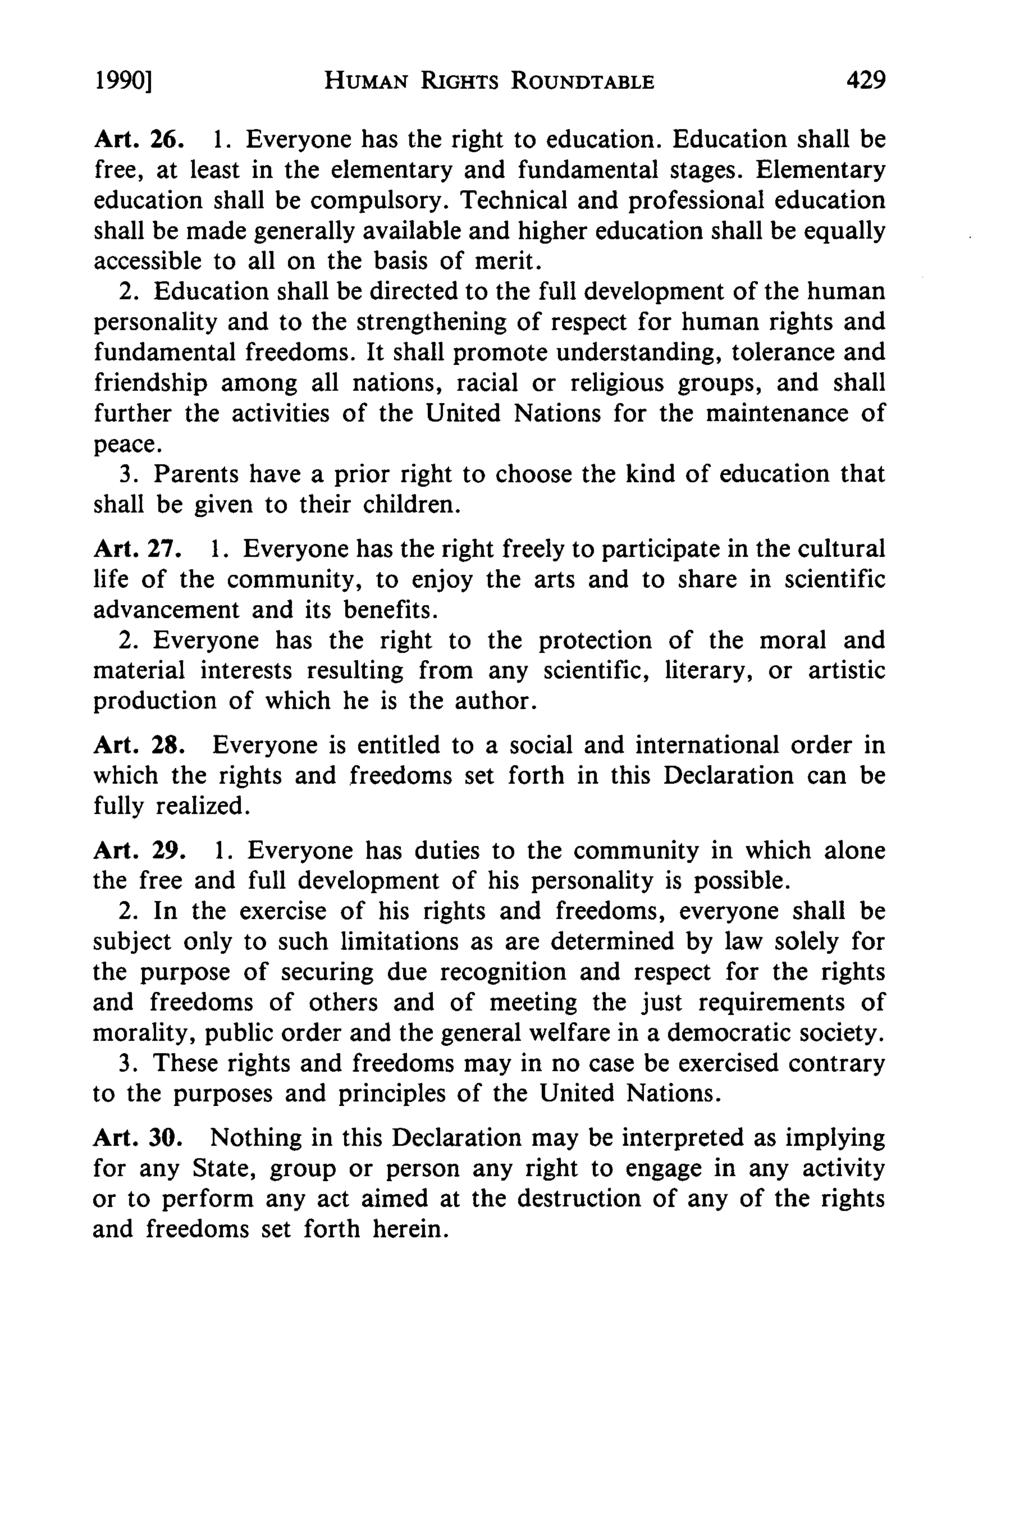 1990] HUMAN RIGHTS ROUNDTABLE 429 Art. 26. 1. Everyone has the right to education. Education shall be free, at least in the elementary and fundamental stages. Elementary education shall be compulsory.